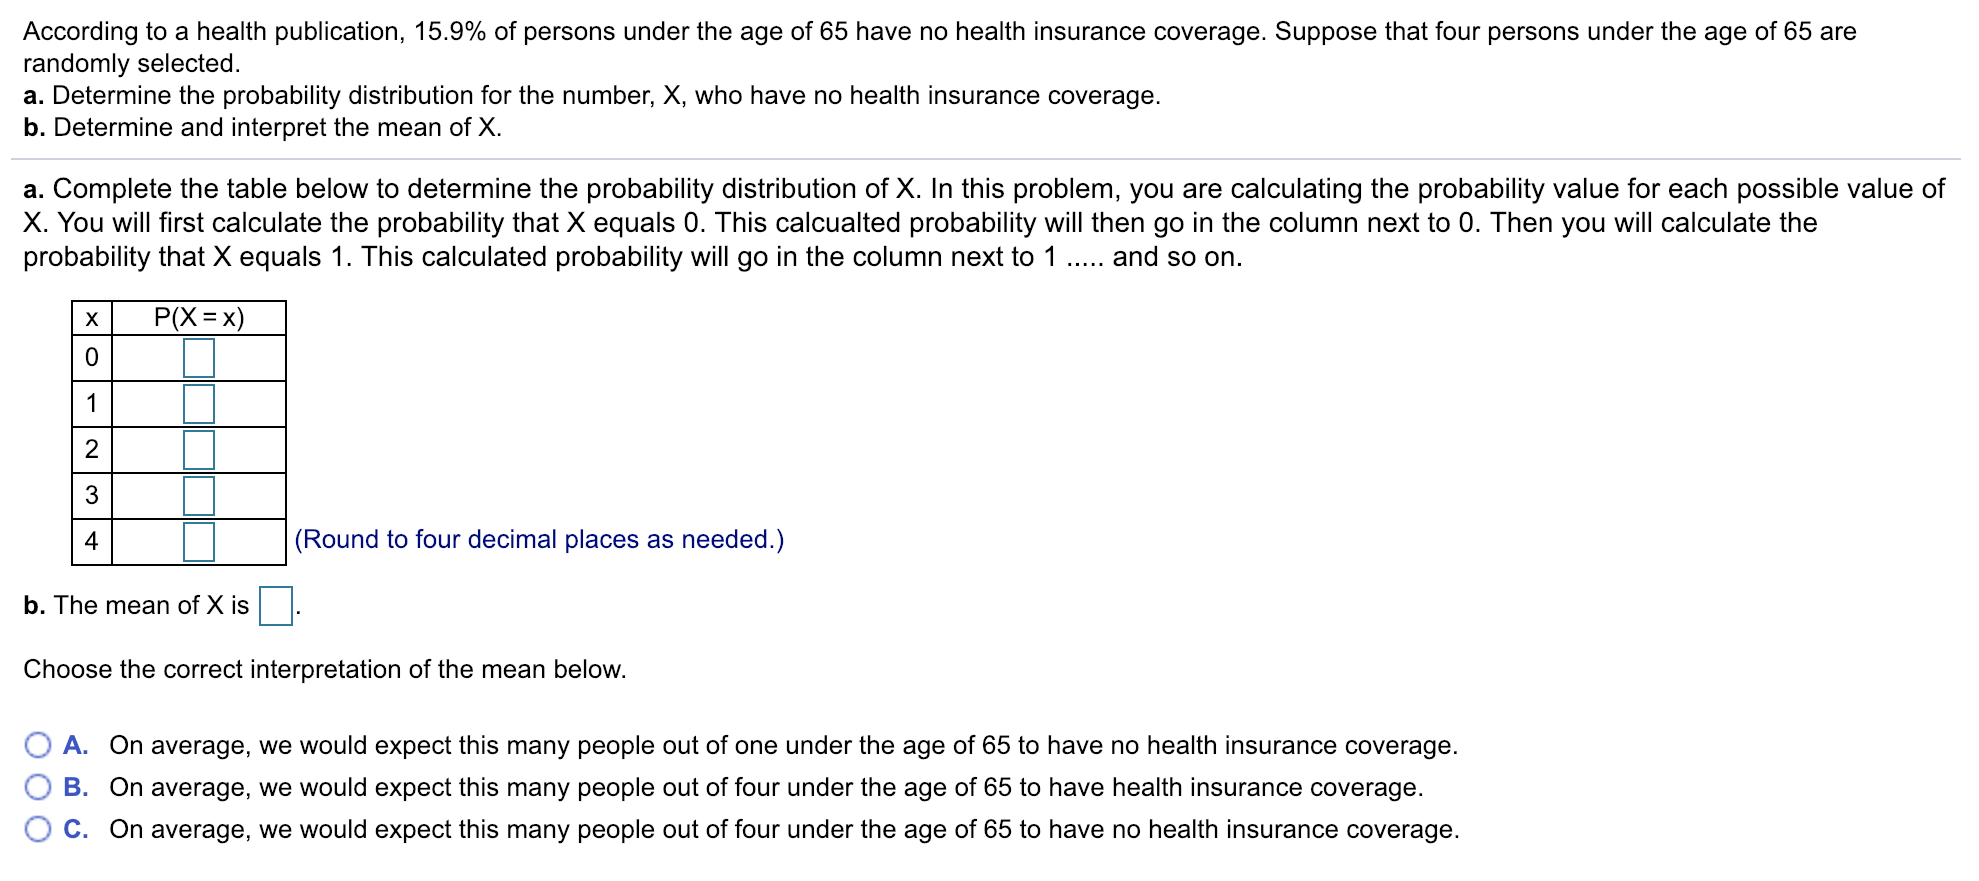 According to a health publication, 15.9% of persons under the age of 65 have no health insurance coverage. Suppose that four persons under the age of 65 are
randomly selected.
a. Determine the probability distribution for the number, X, who have no health insurance coverage.
b. Determine and interpret the mean of X
a. Complete the table below to determine the probability distribution of X. In this problem, you are calculating the probability value for each possible value of
X. You will first calculate the probability that X equals 0. This calcualted probability will then go in the column next to 0. Then you will calculate the
probability that X equals 1. This calculated probability will go in the column next to and so on.
2
3
4
(Round to four decimal places as needed.)
b. The mean of X is
Choose the correct interpretation of the mean below.
O A. On average, we would expect this many people out of one under the age of 65 to have no health insurance coverage.
0 B. On average, we would expect this many people out of four under the age of 65 to have health insurance coverage
° C. On average, we would expect this many people out of four under the age of 65 to have no health insurance coverage
